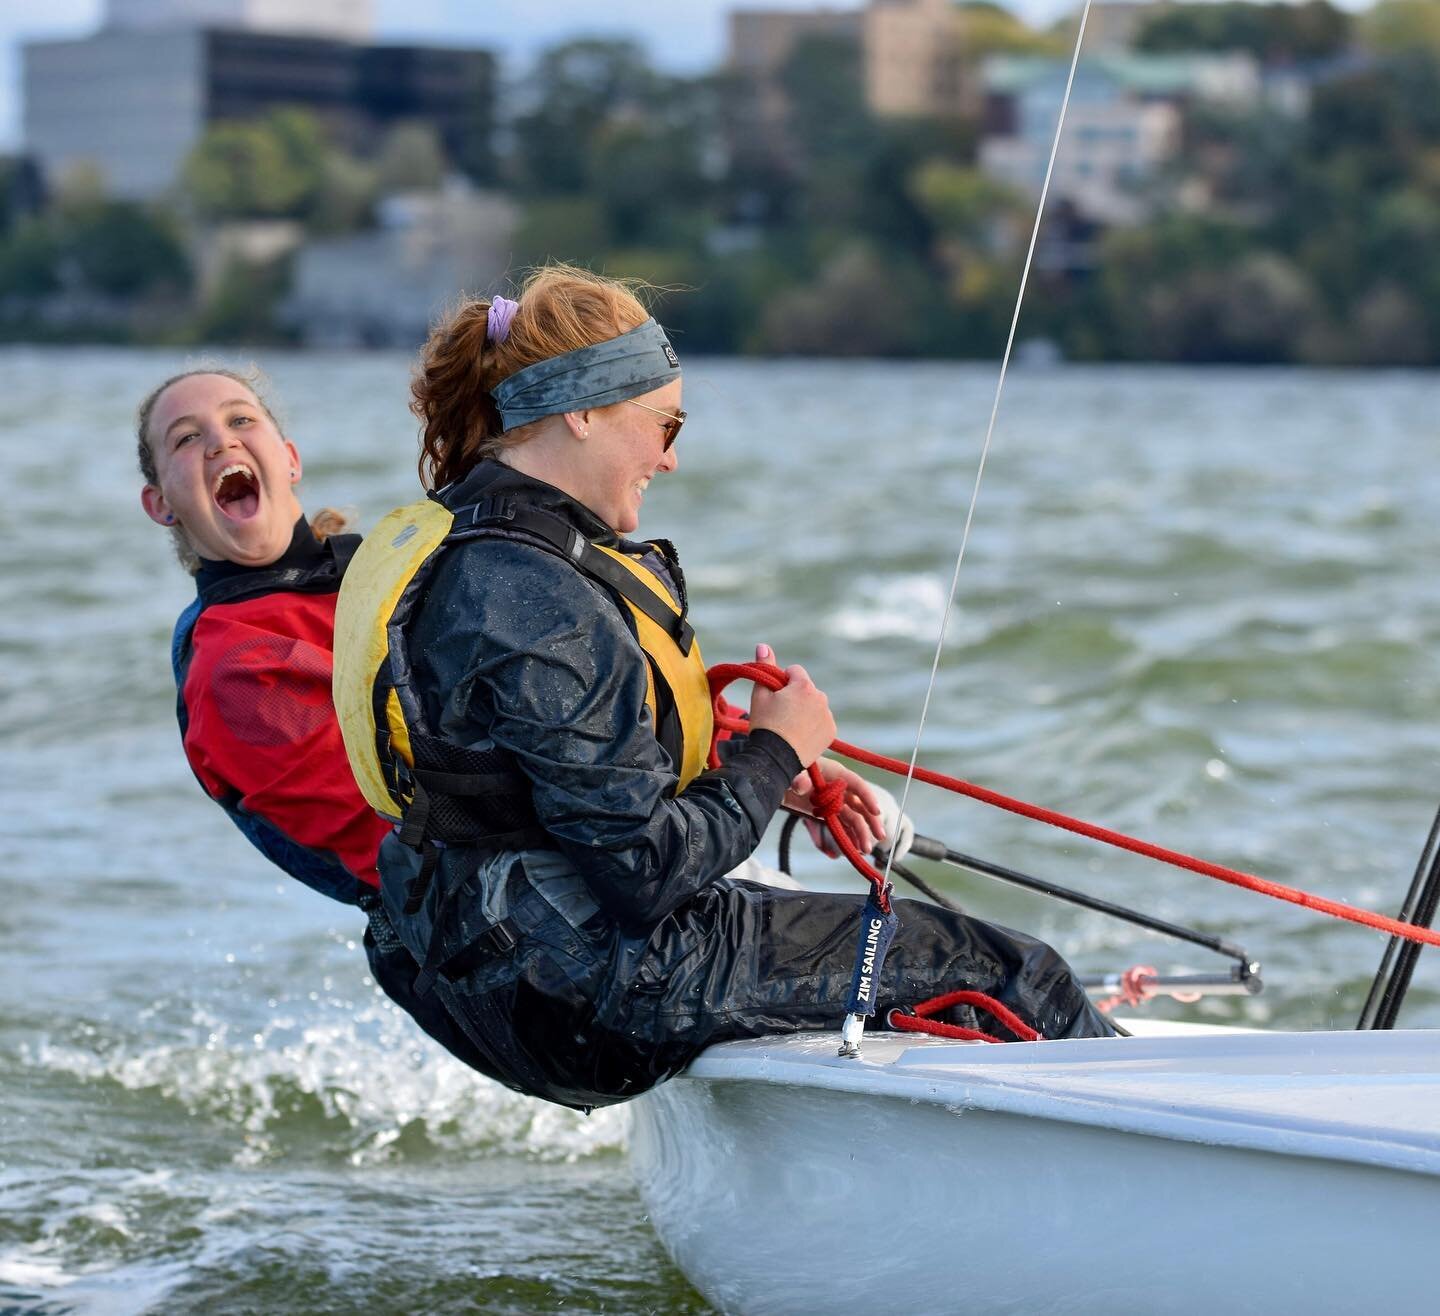 There are few things we&rsquo;re prouder of than the women of the Wisconsin Sailing Team. Happy International Women&rsquo;s Day, everyone, and Go Go Wisco Women!